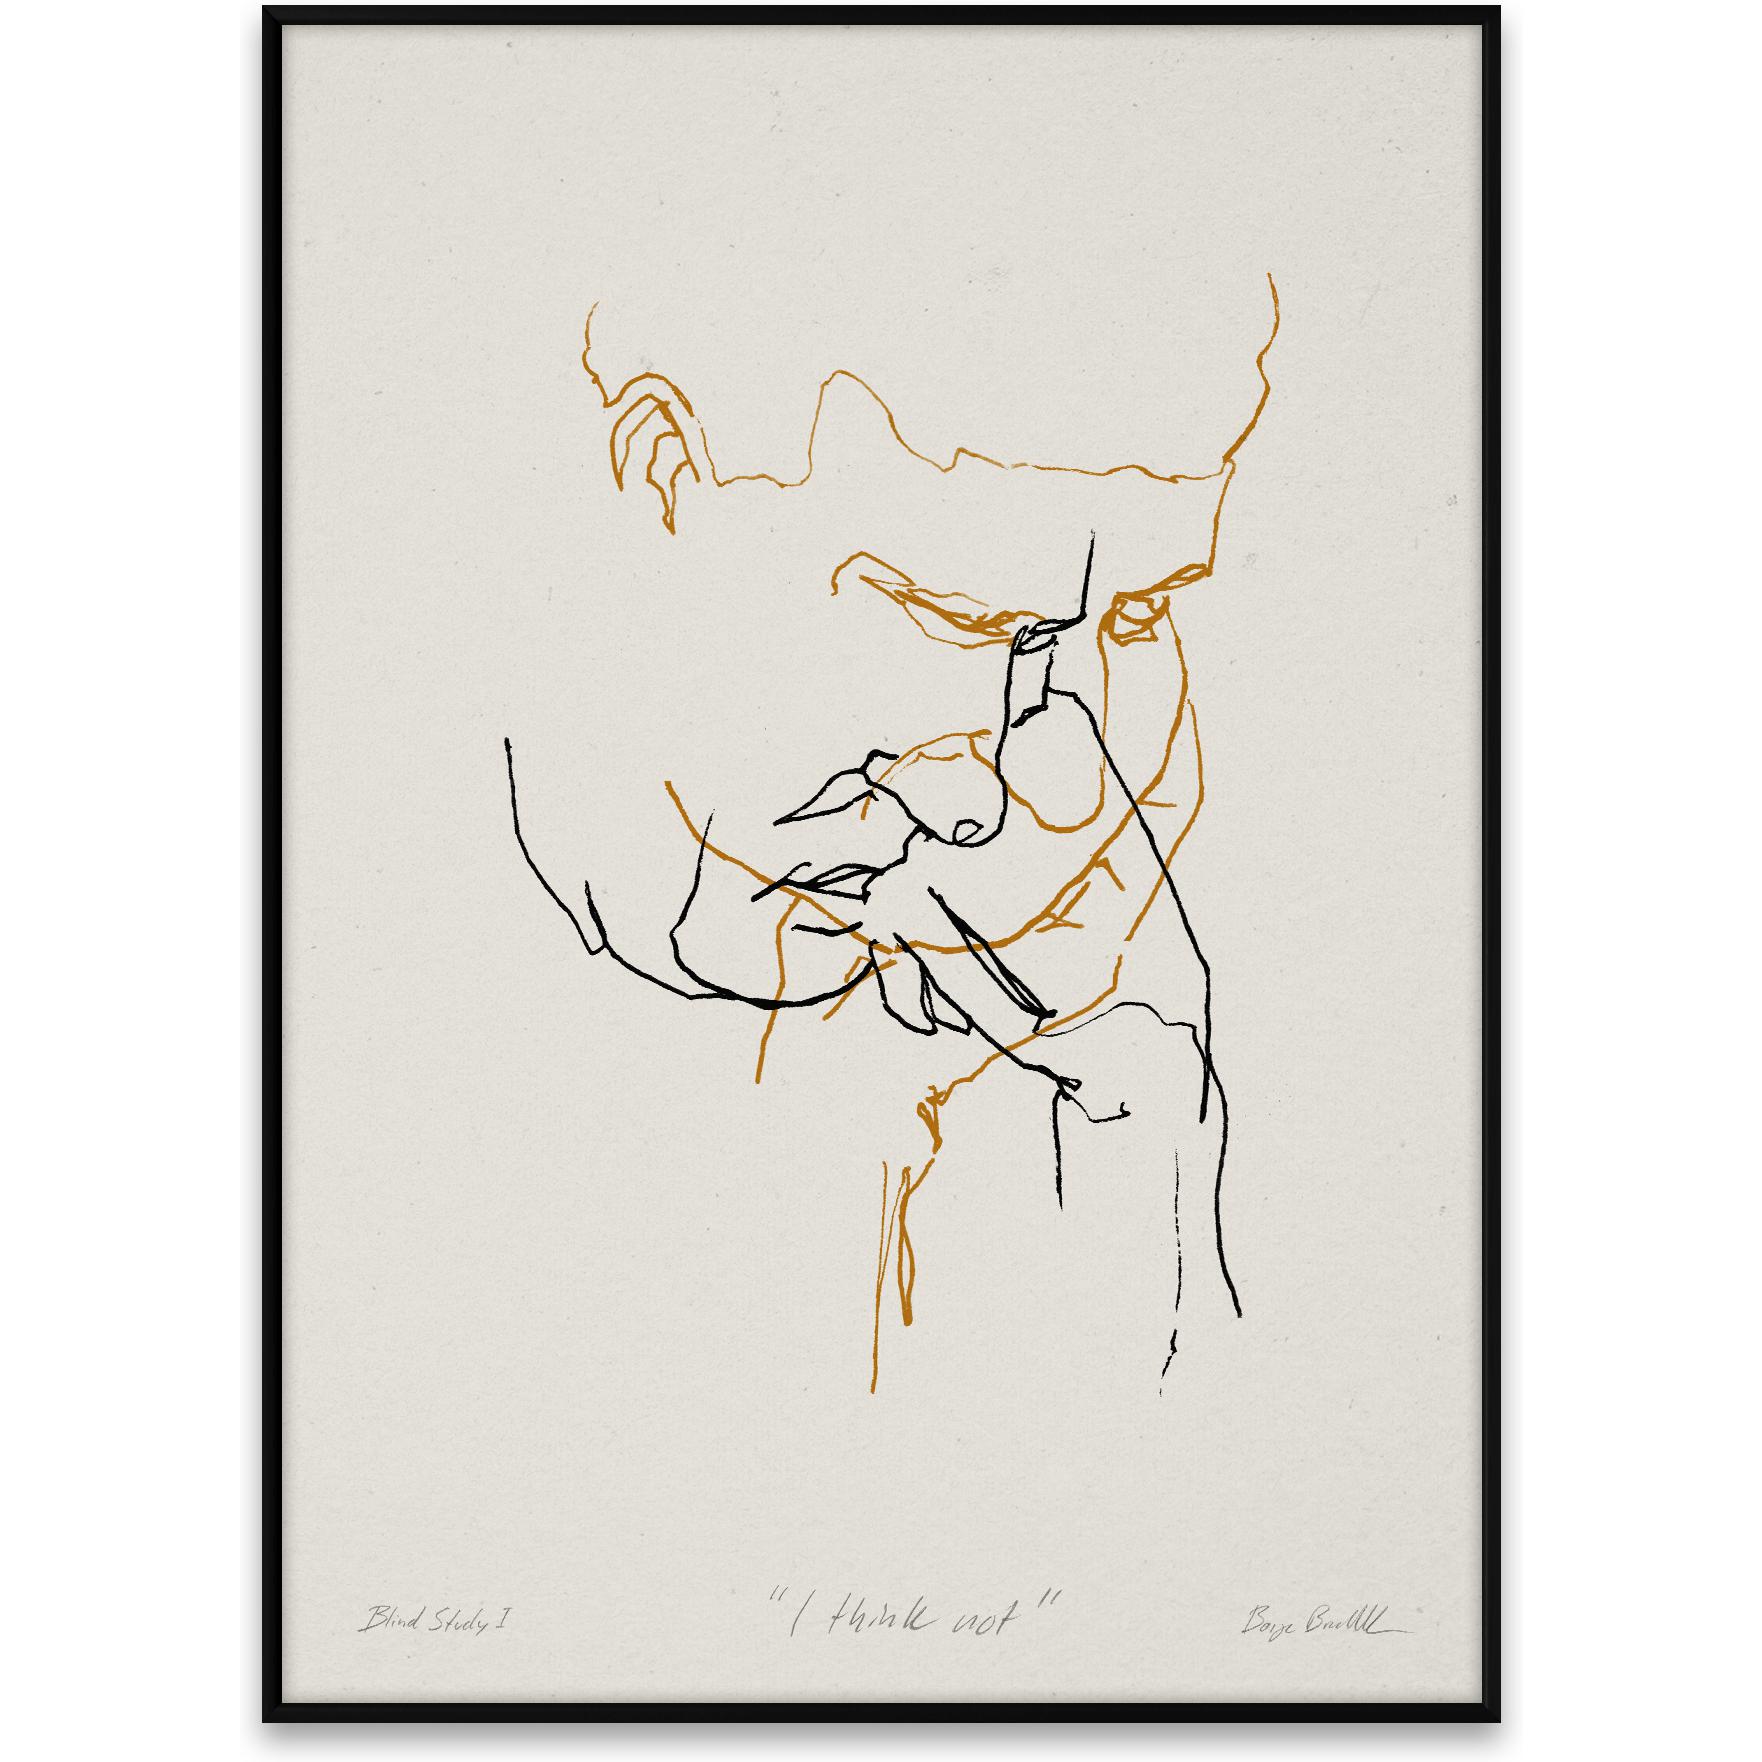 Paper Collective I Think Not 01 Poster 30x40 Cm, Yellow